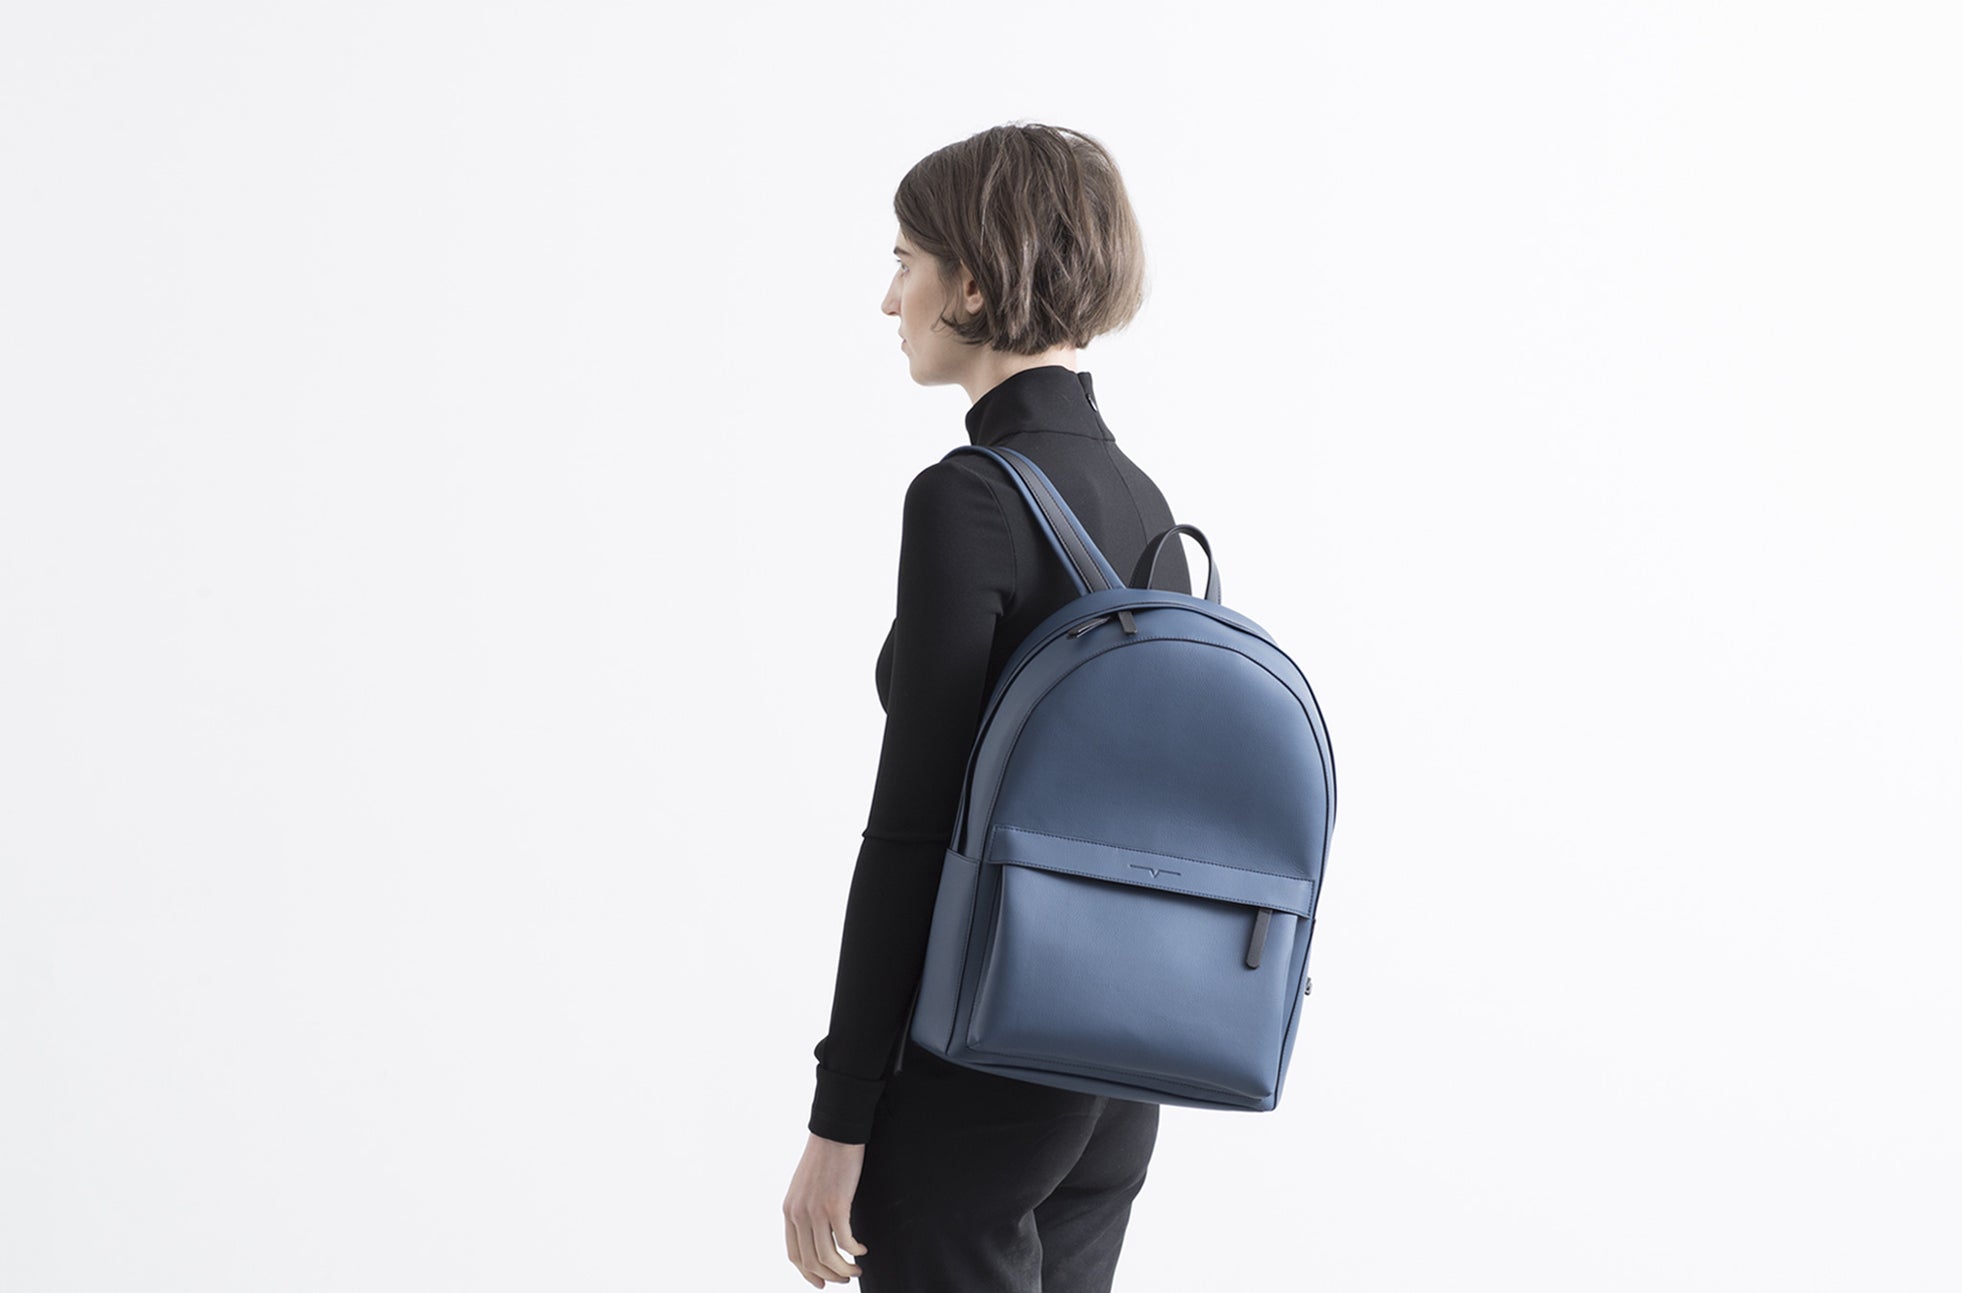 The Classic Backpack in Technik-Leather in Denim and Black image 9